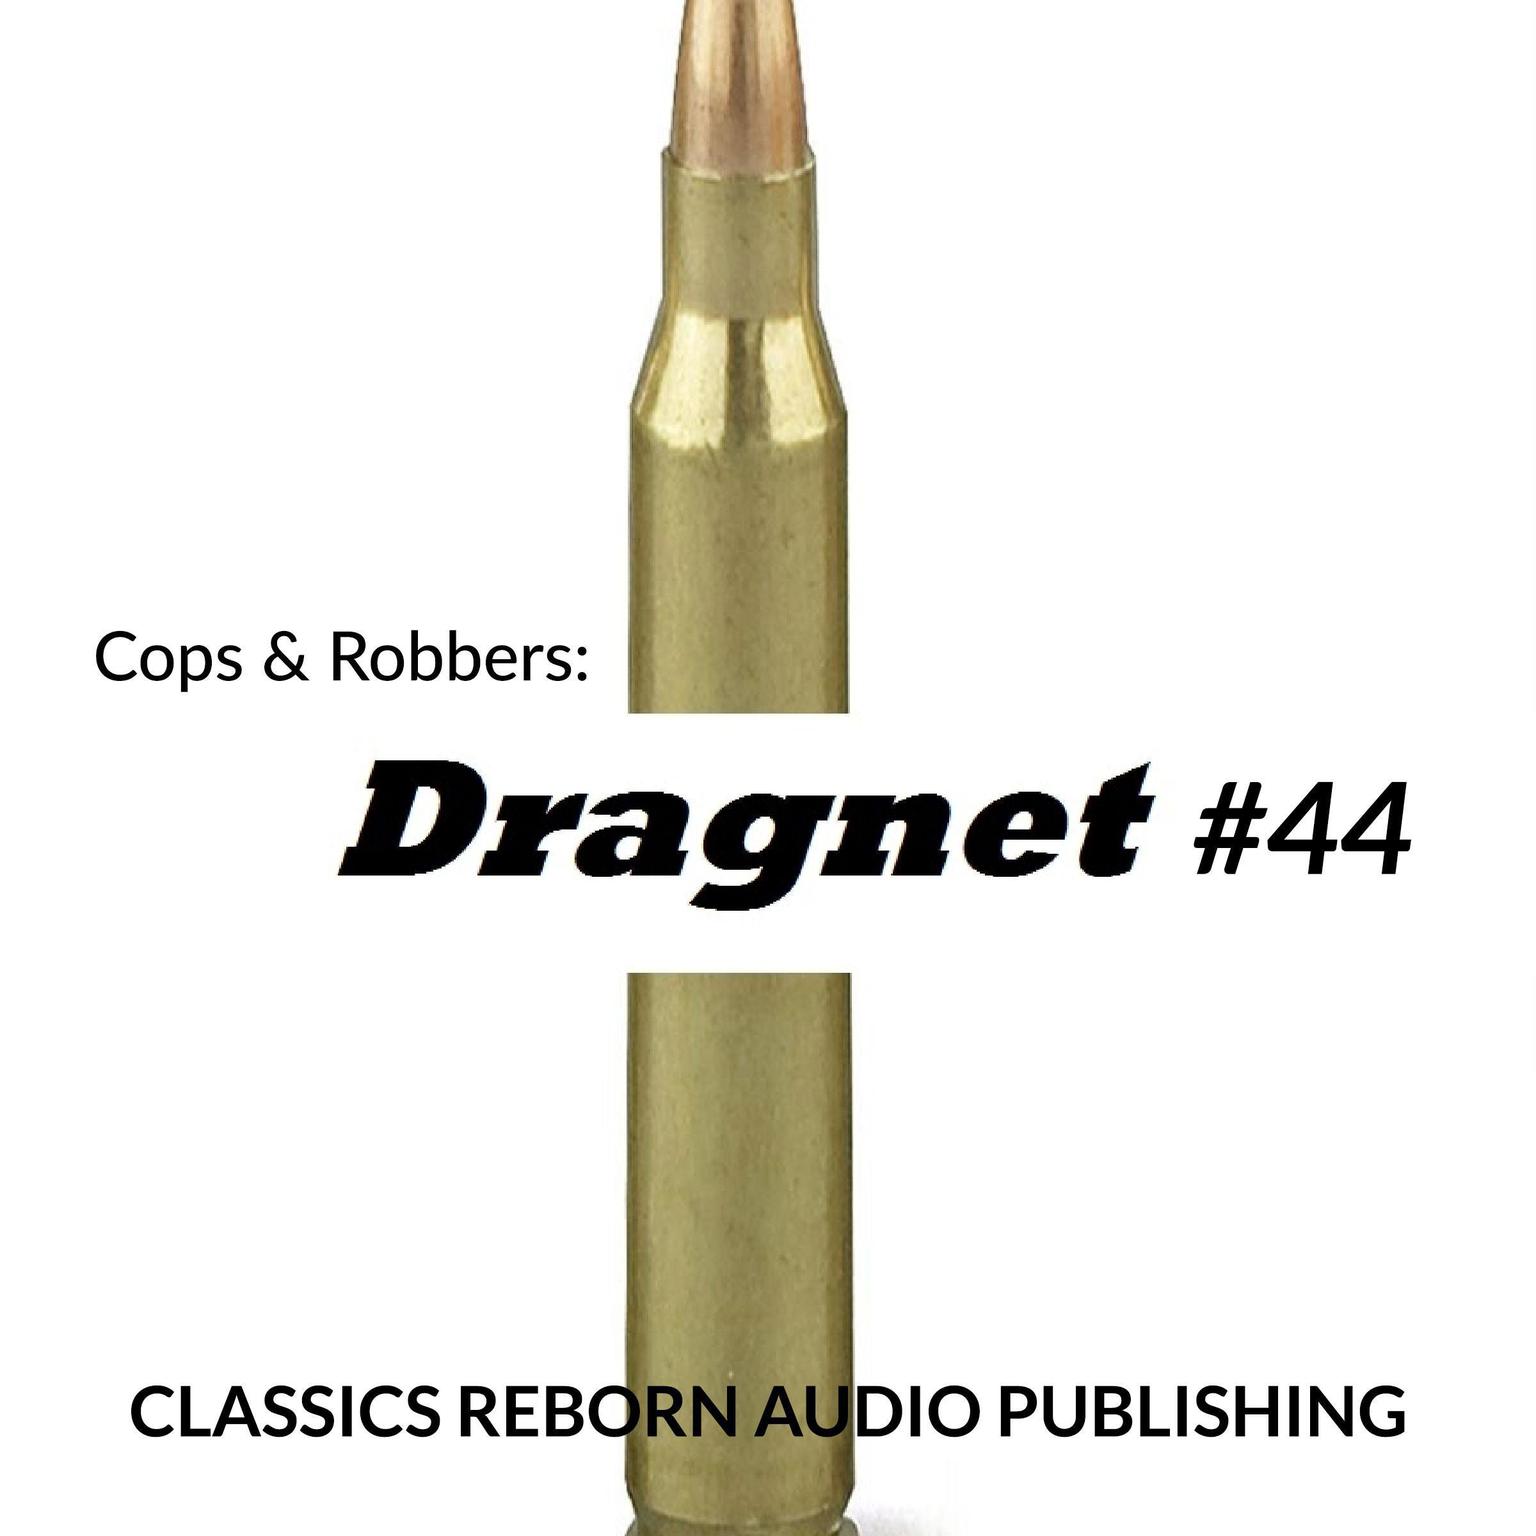 Cops & Robbers: Dragnet #44 Audiobook, by Classics Reborn Audio Publishing